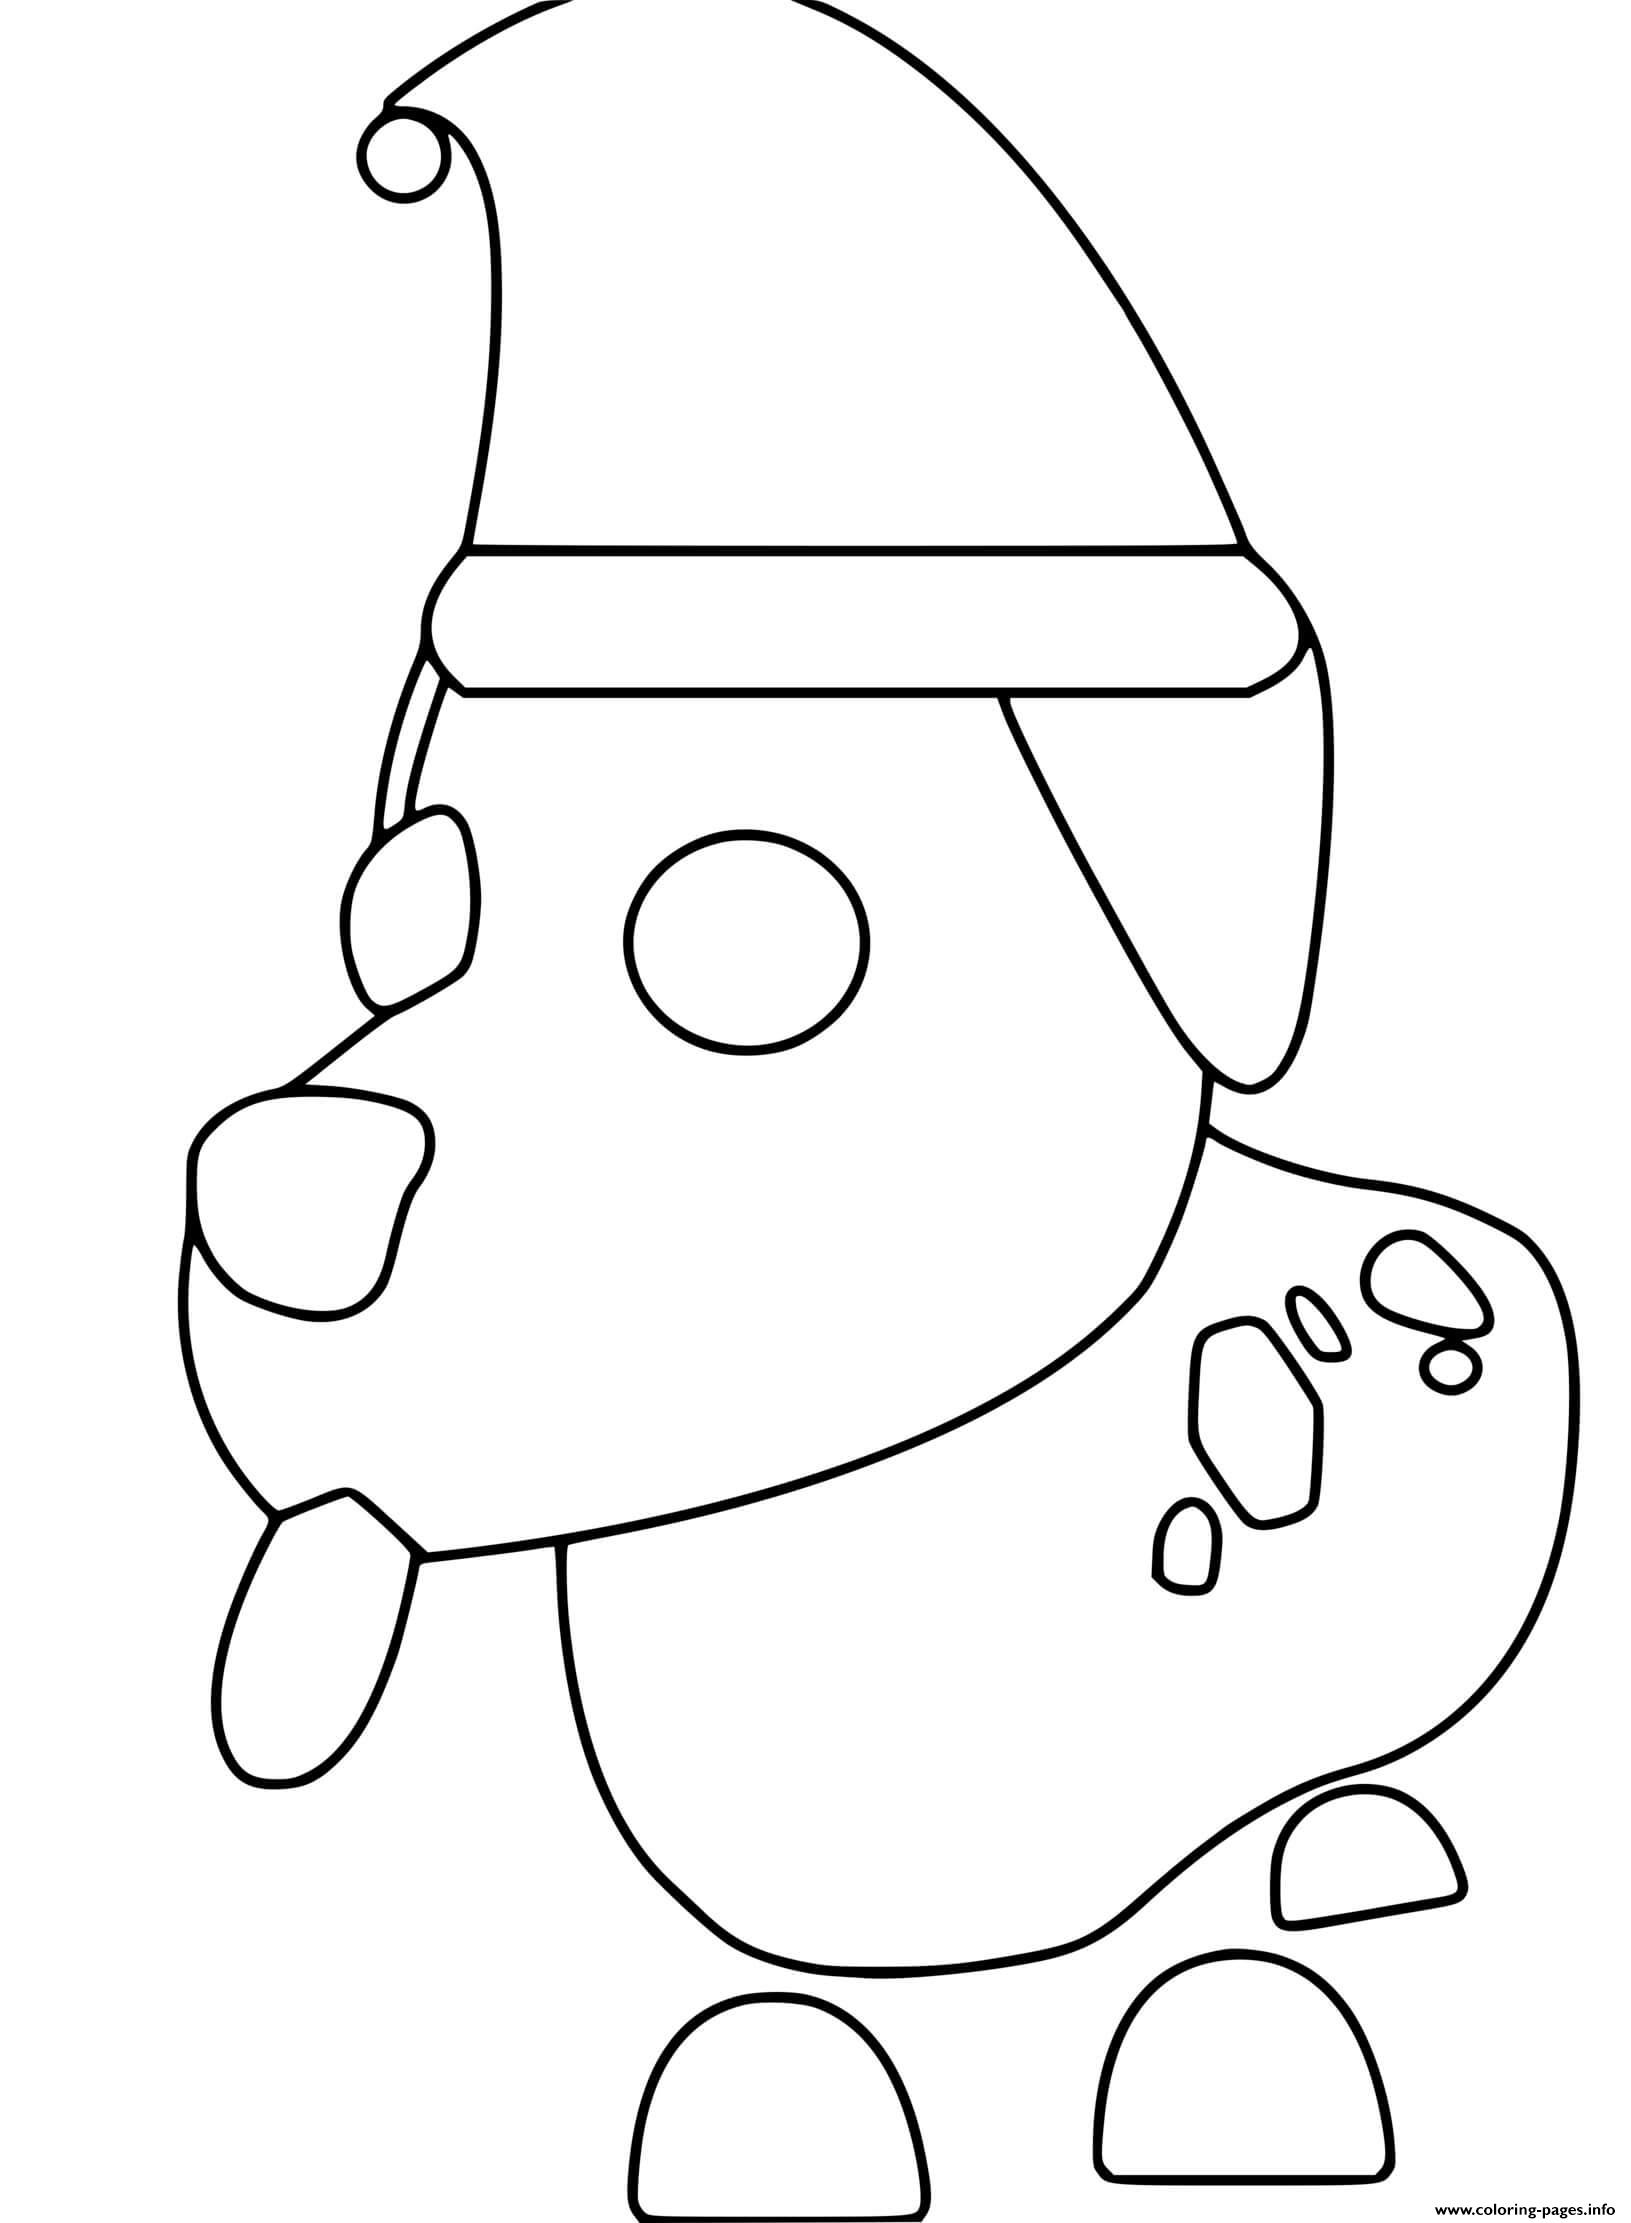 Roblox Adopt Me Christmas Dog Coloring Pages Printable - roblox adopt me dragon coloring pages